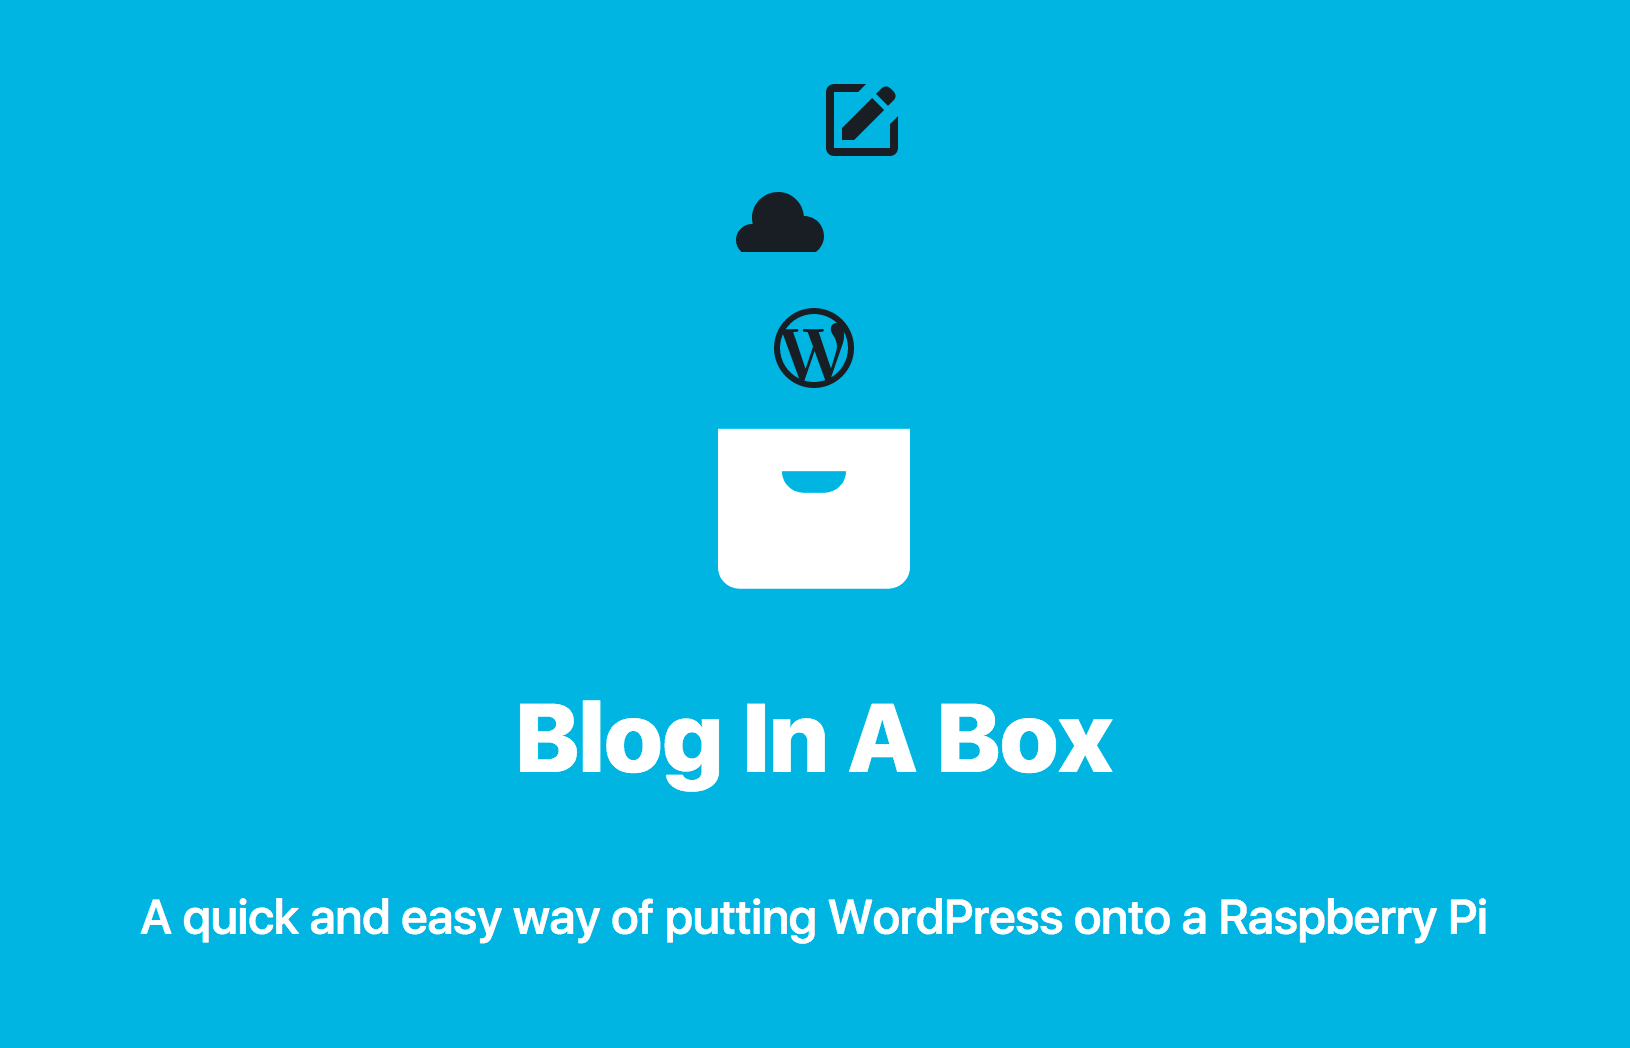 Blog in a Box